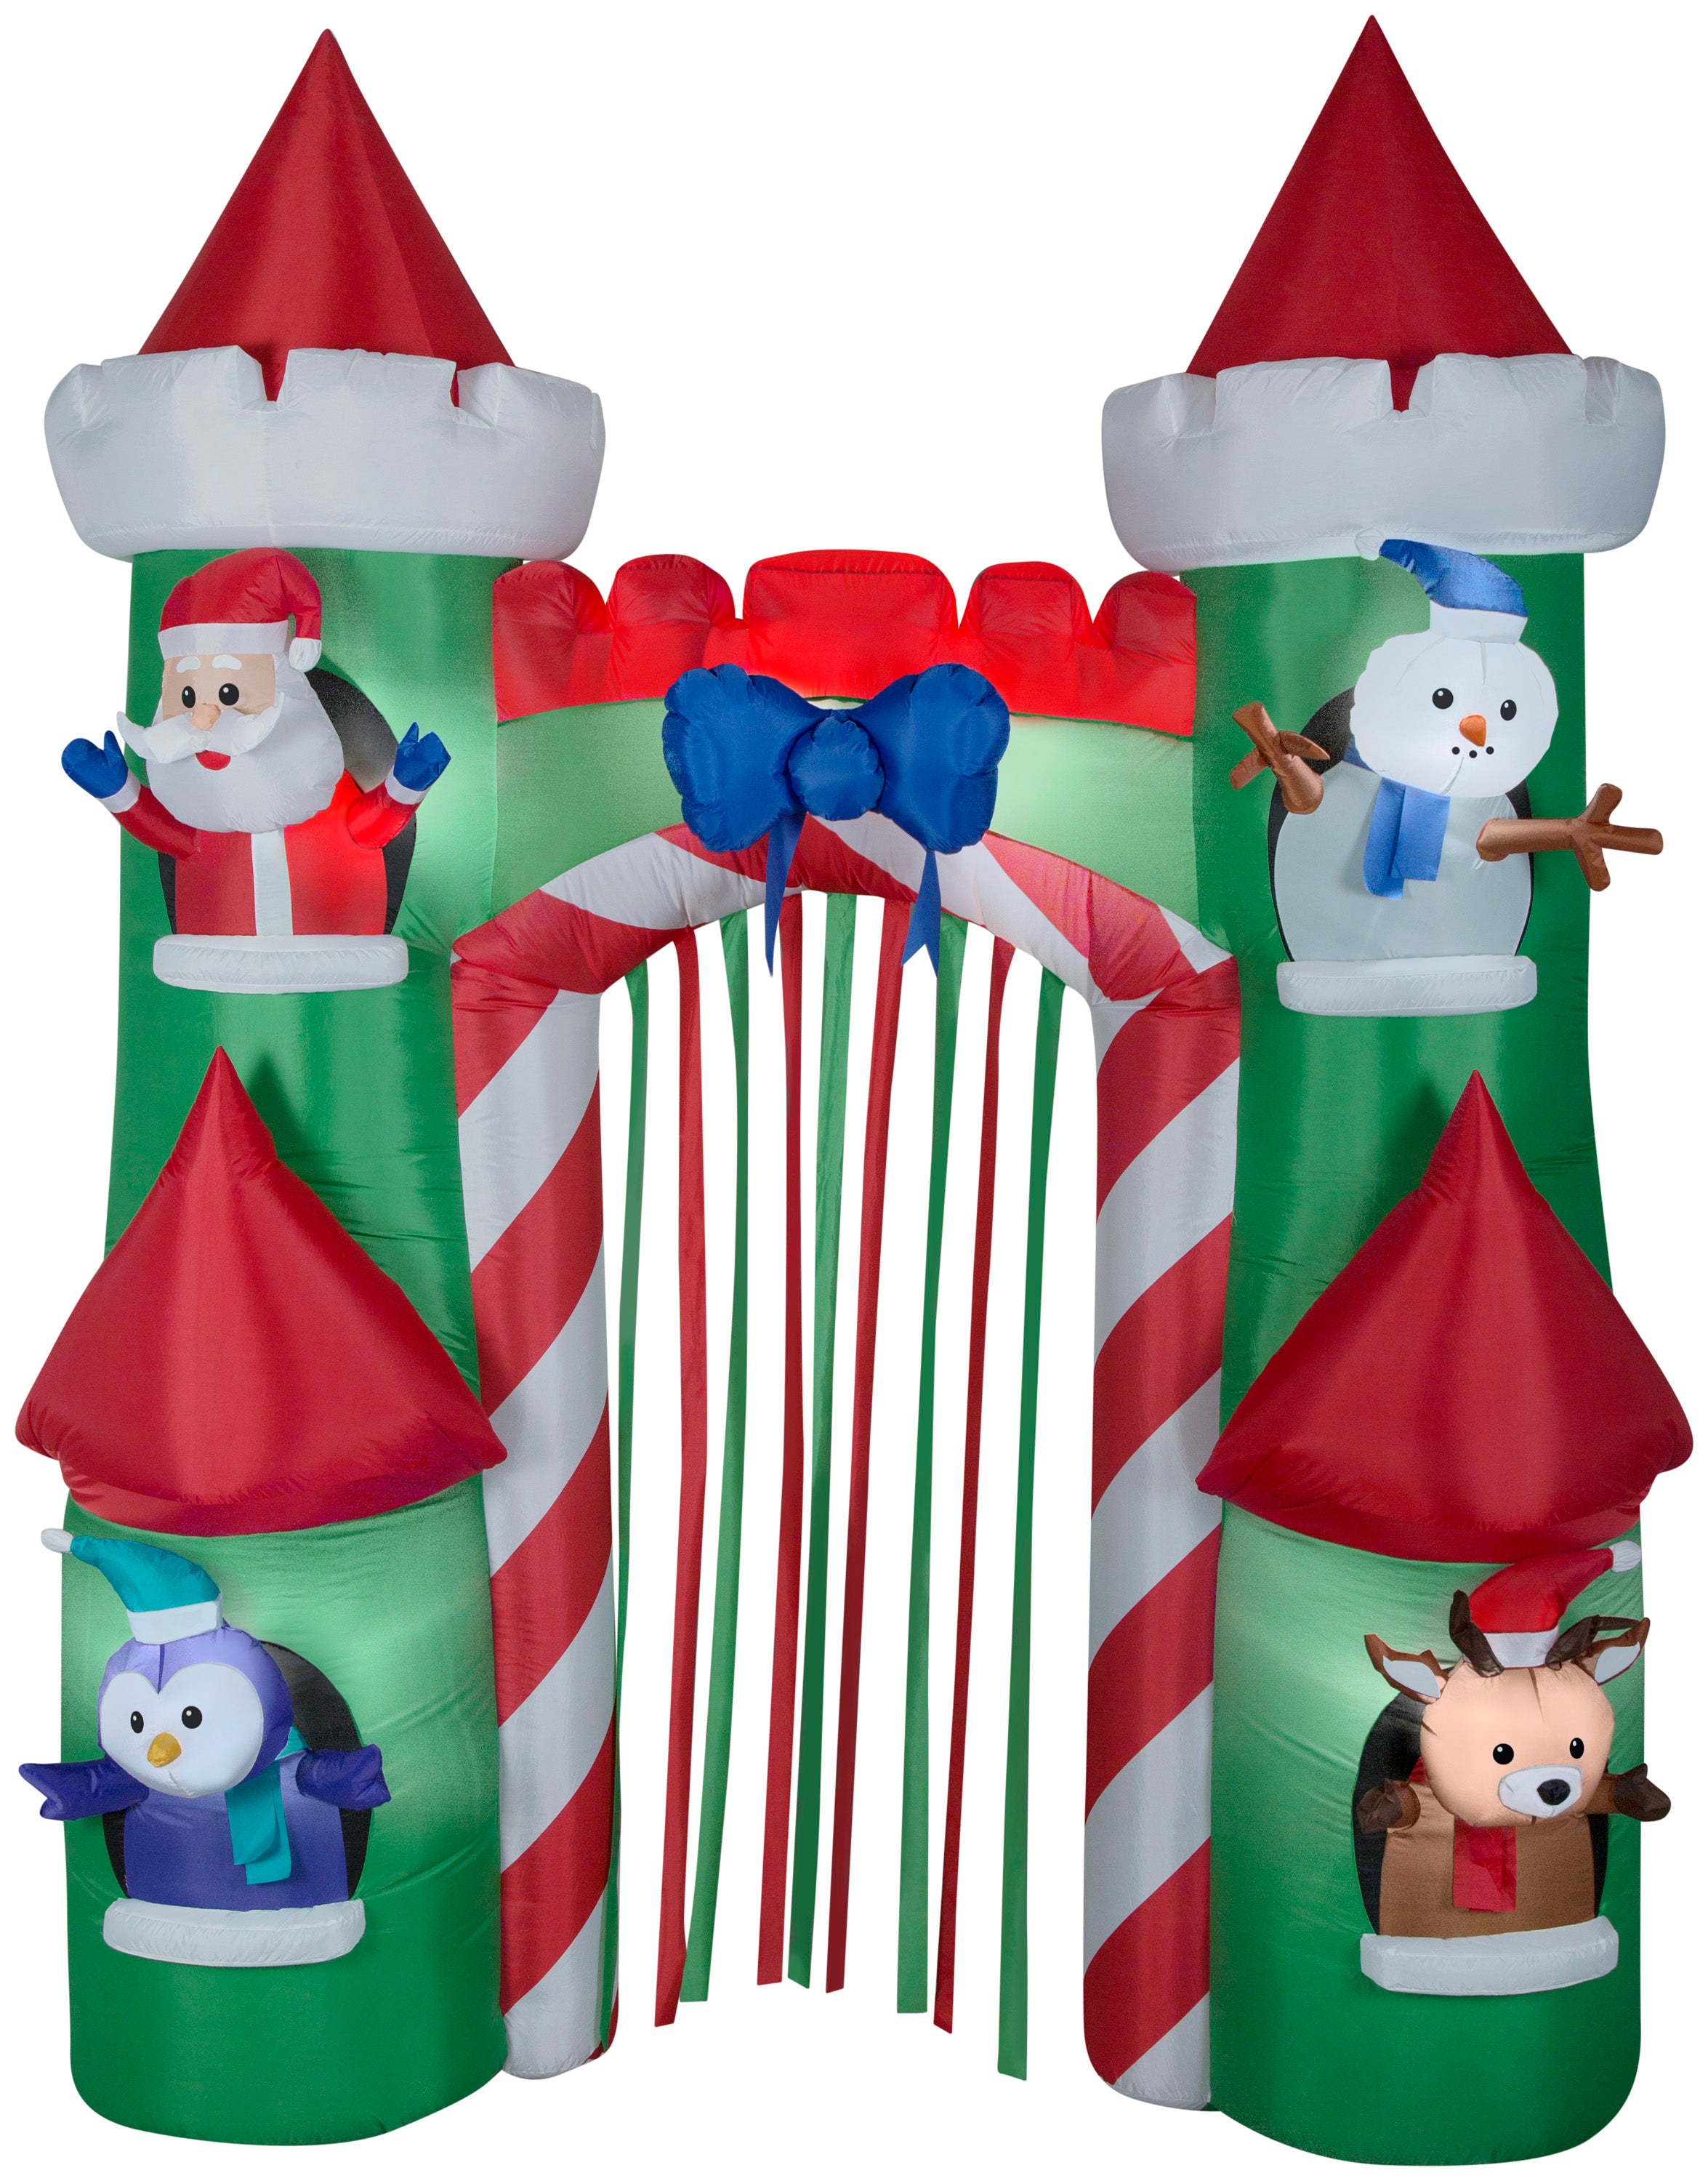 9' Airblown Archway Santa's Castle Christmas Inflatable